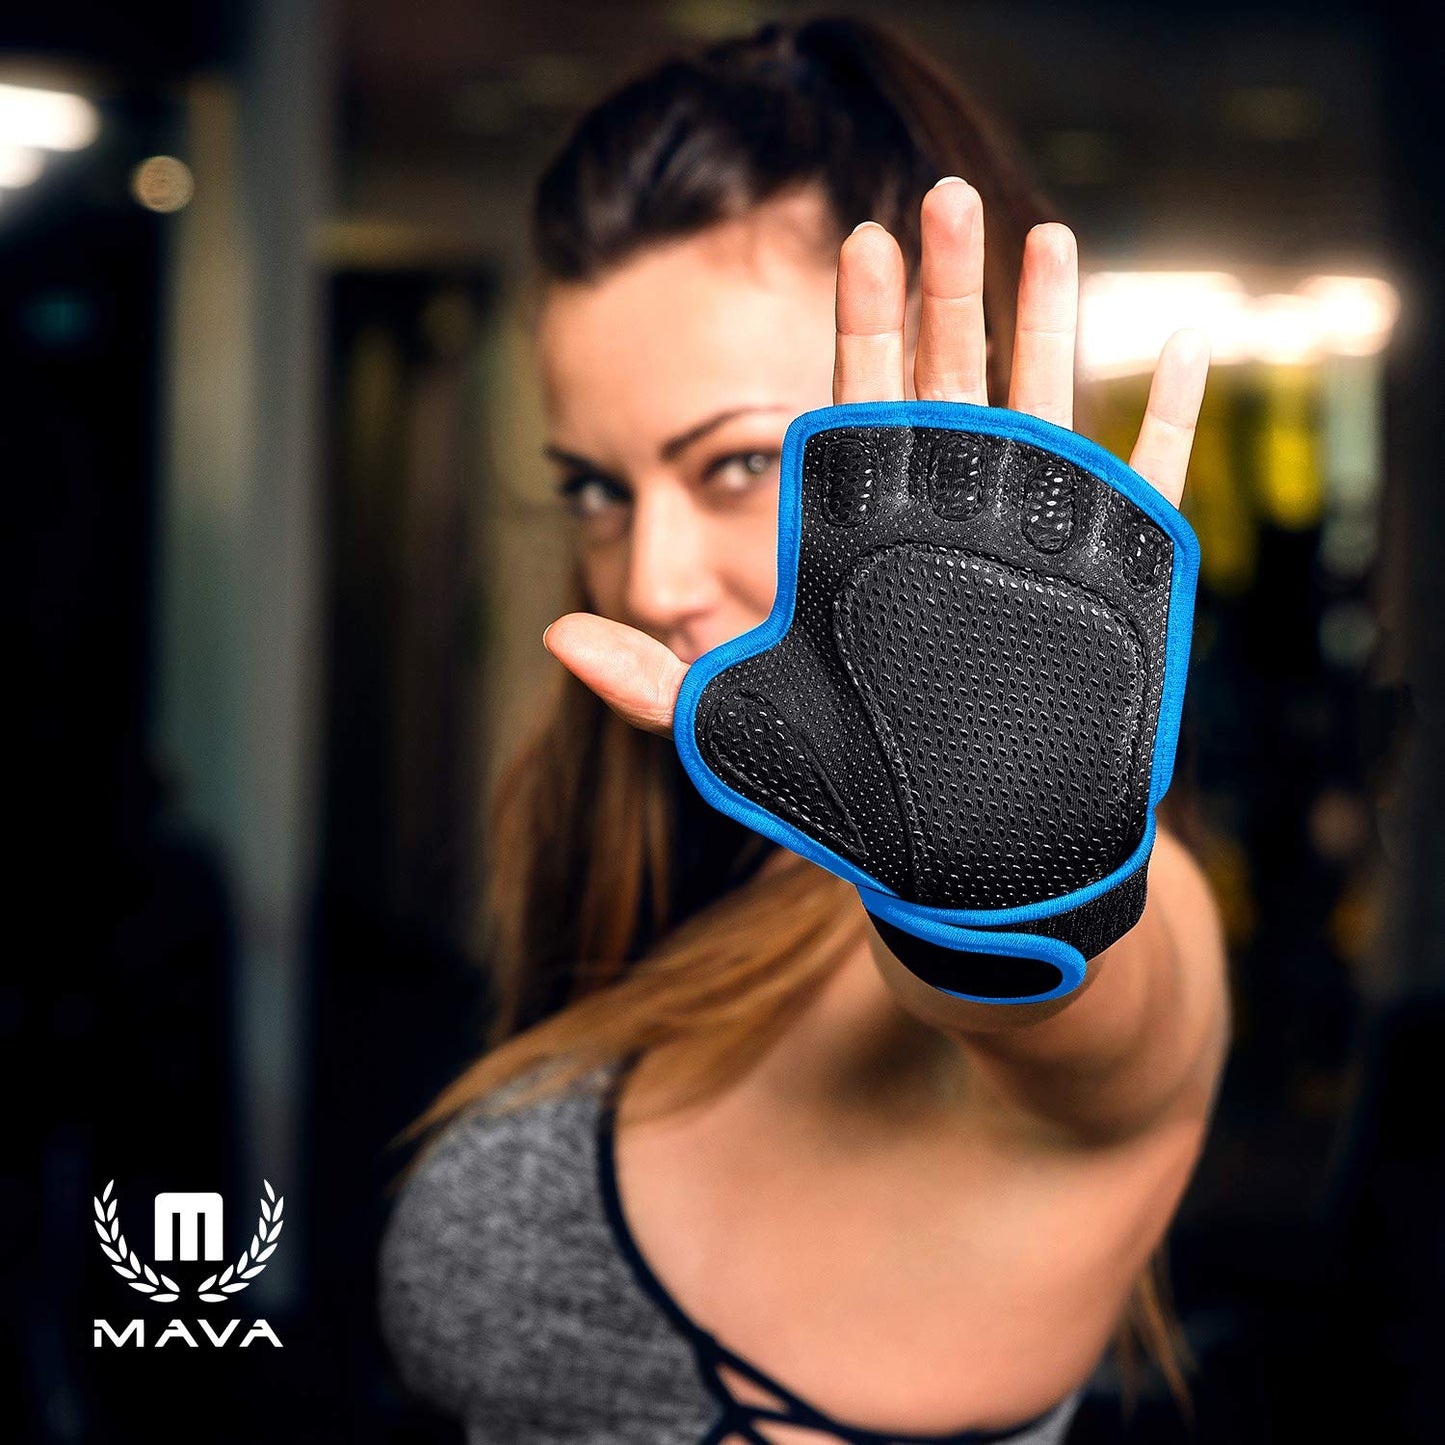 Mava Sports Ventilated Weightlifting Workout Gloves with Wrist Support Sz Medium Blue - Opticdeals